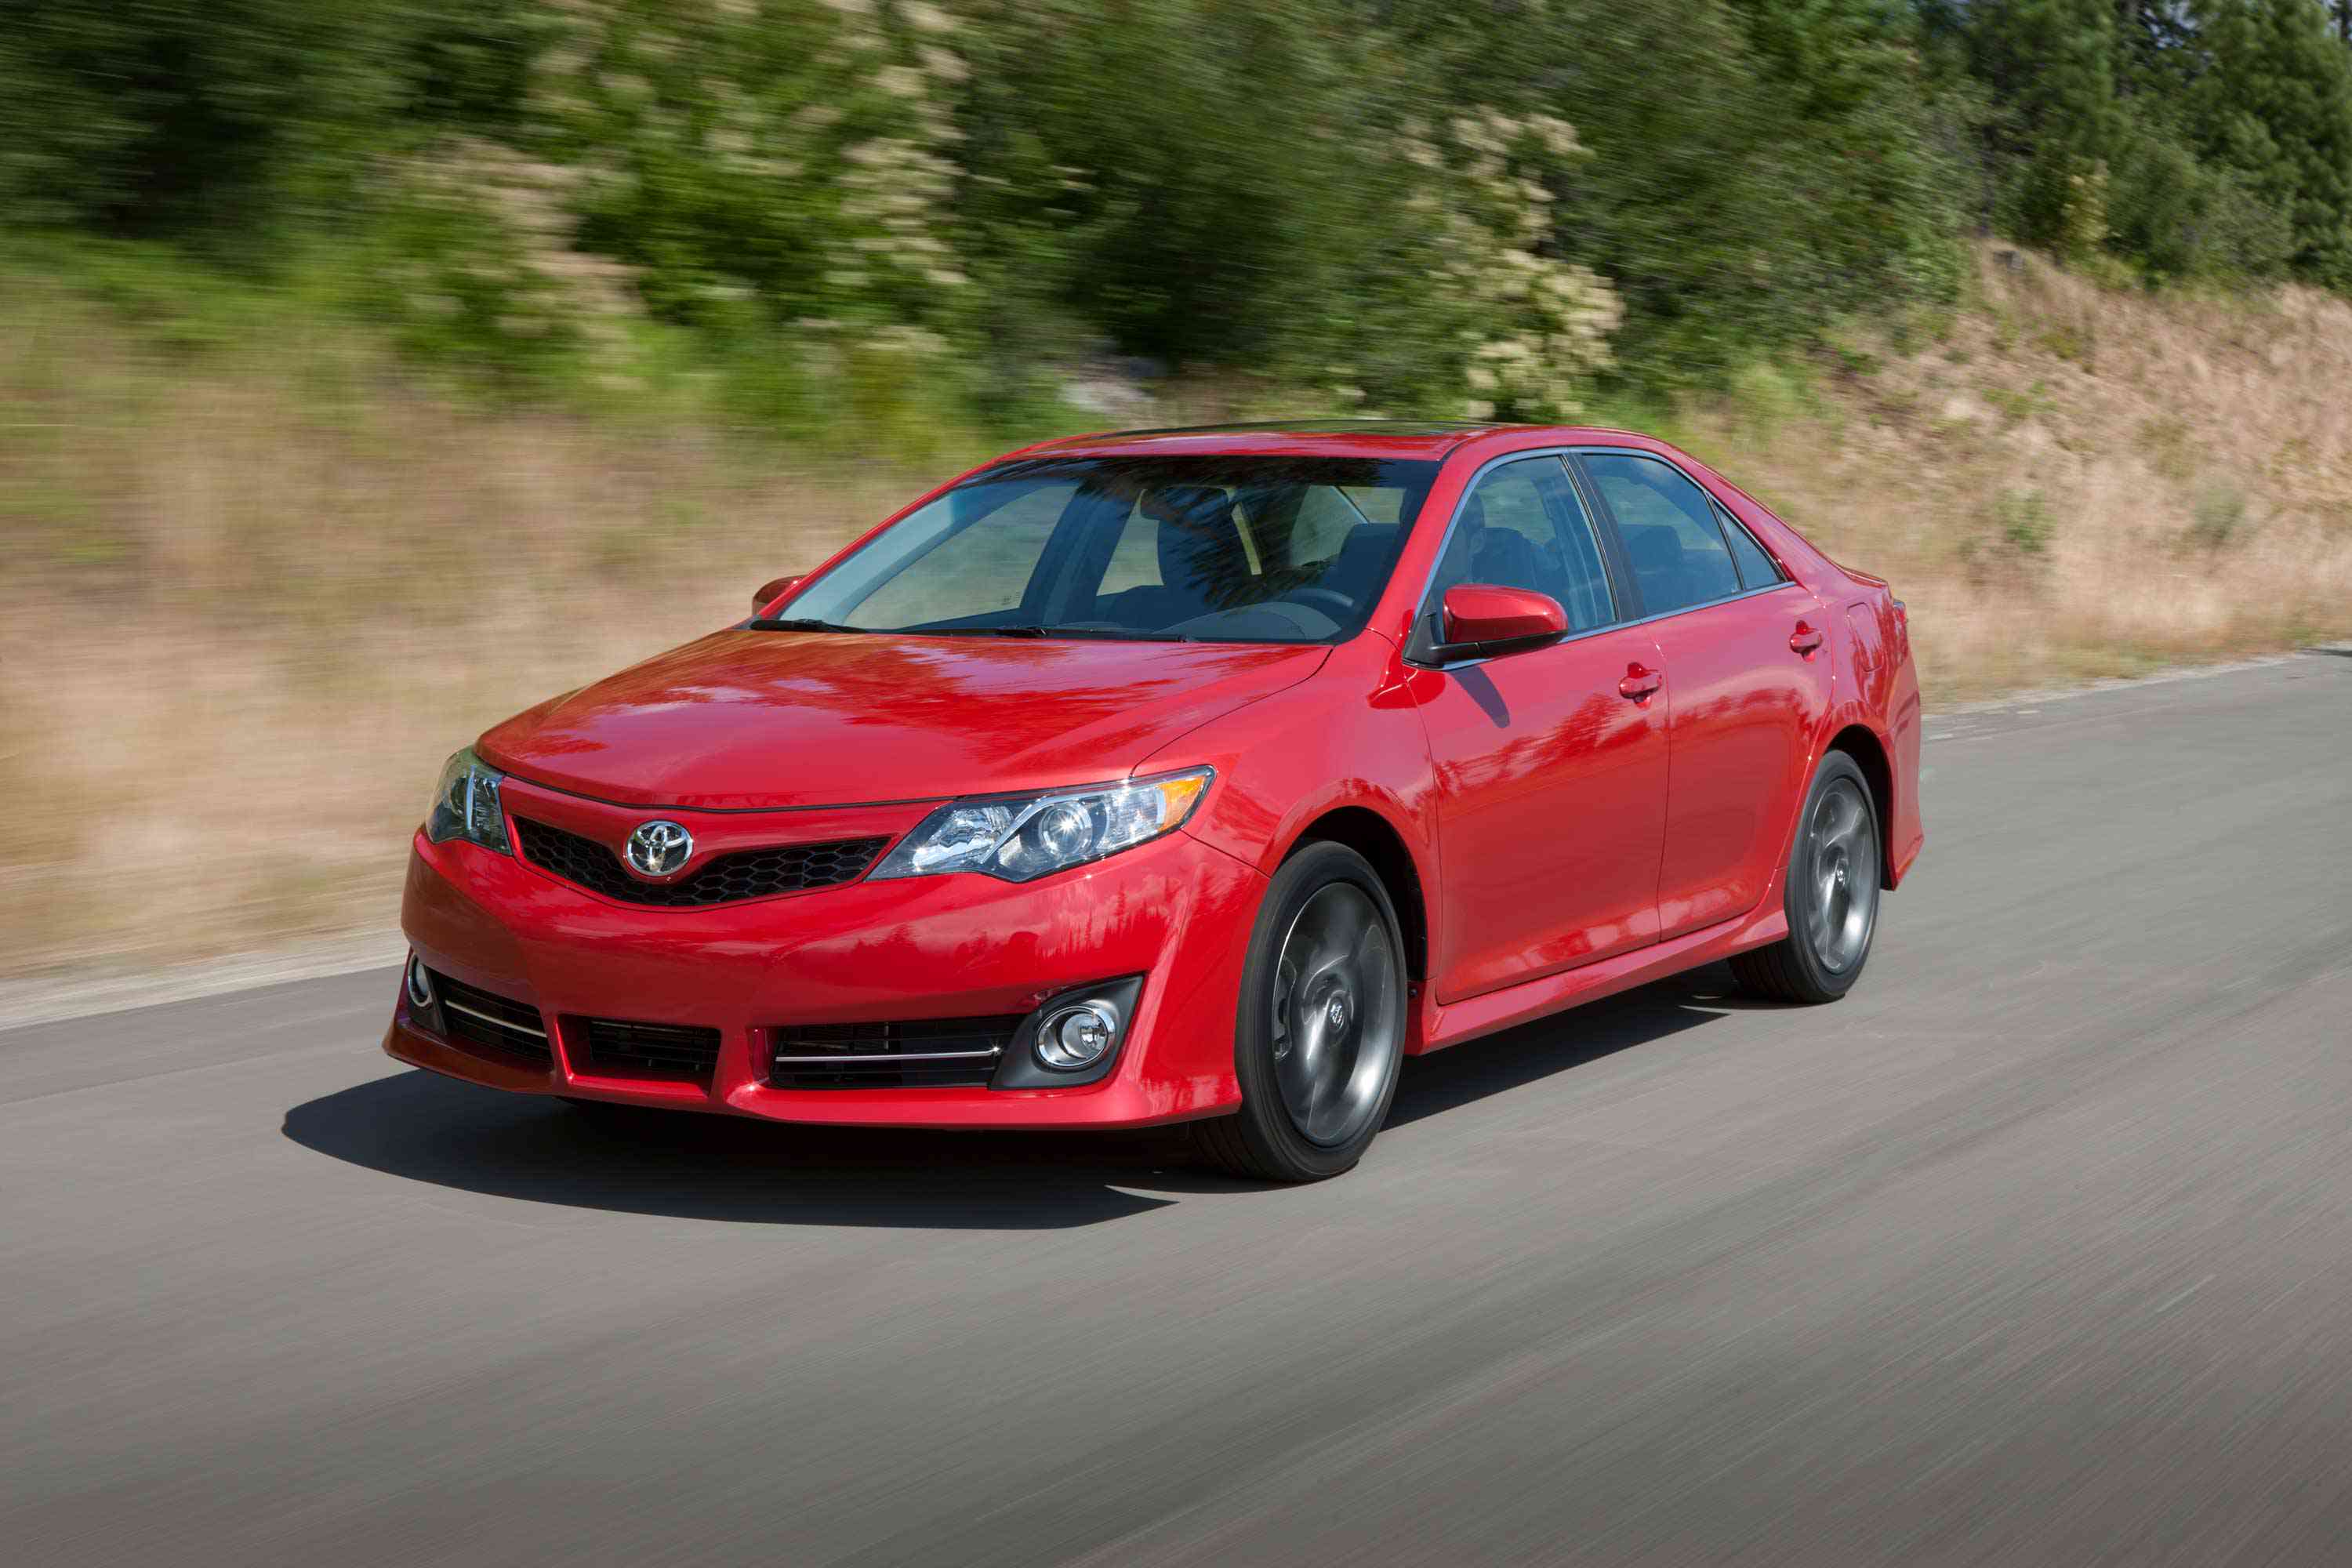 2013 Toyota Camry Review, Ratings, Specs, Prices, and Photos - The Car